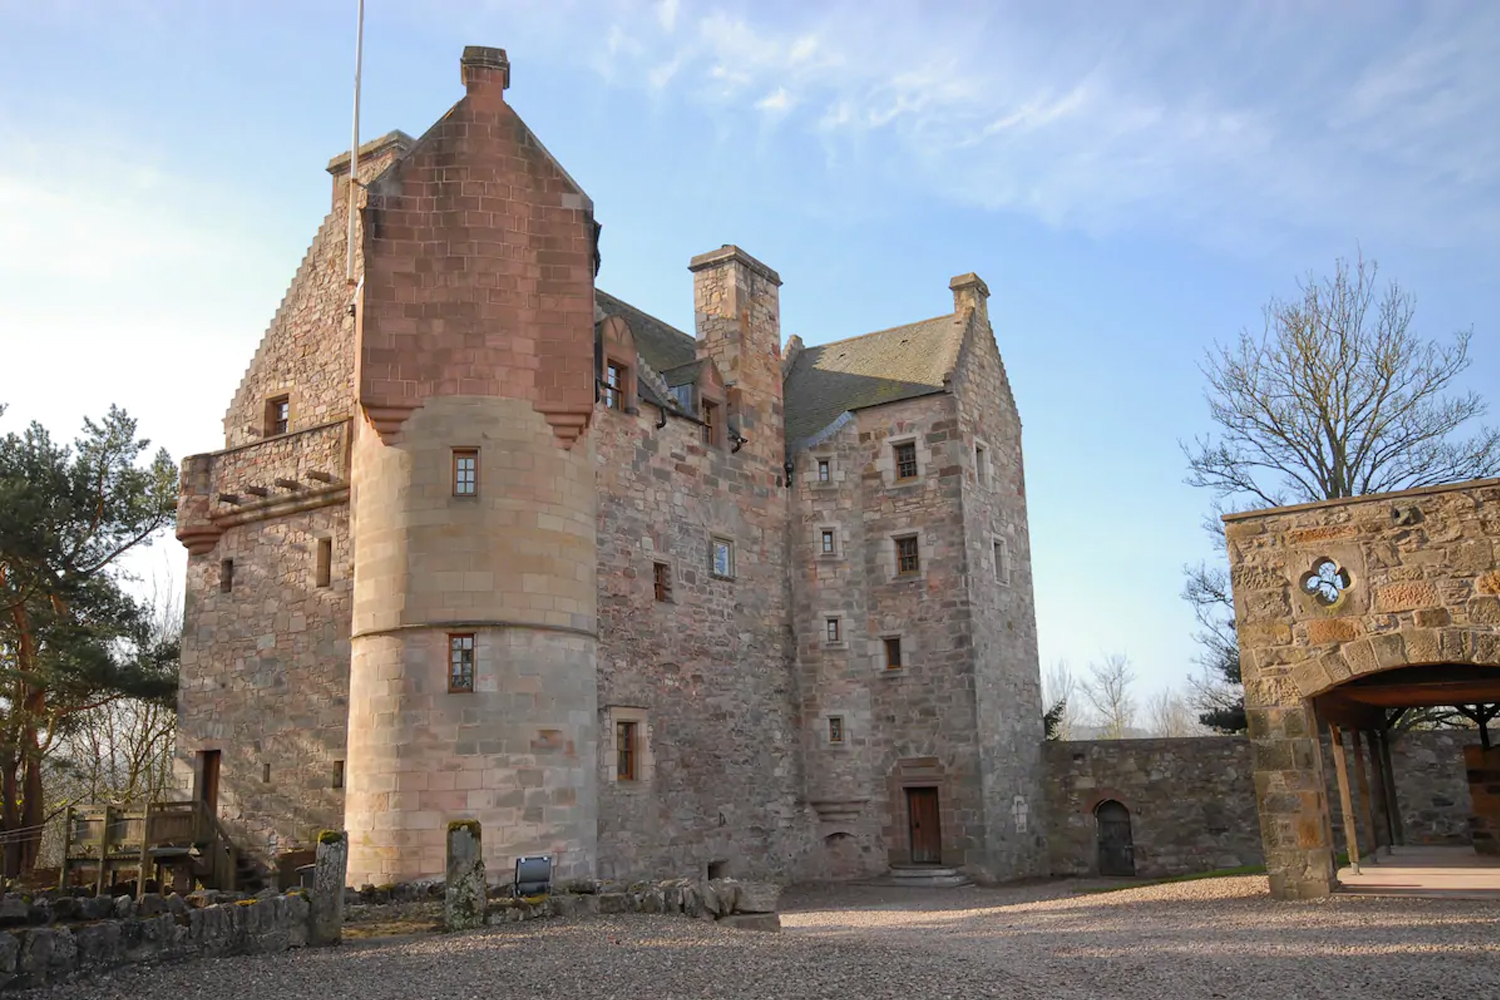 Dairsie is a historic, self-catering castle located in Fife